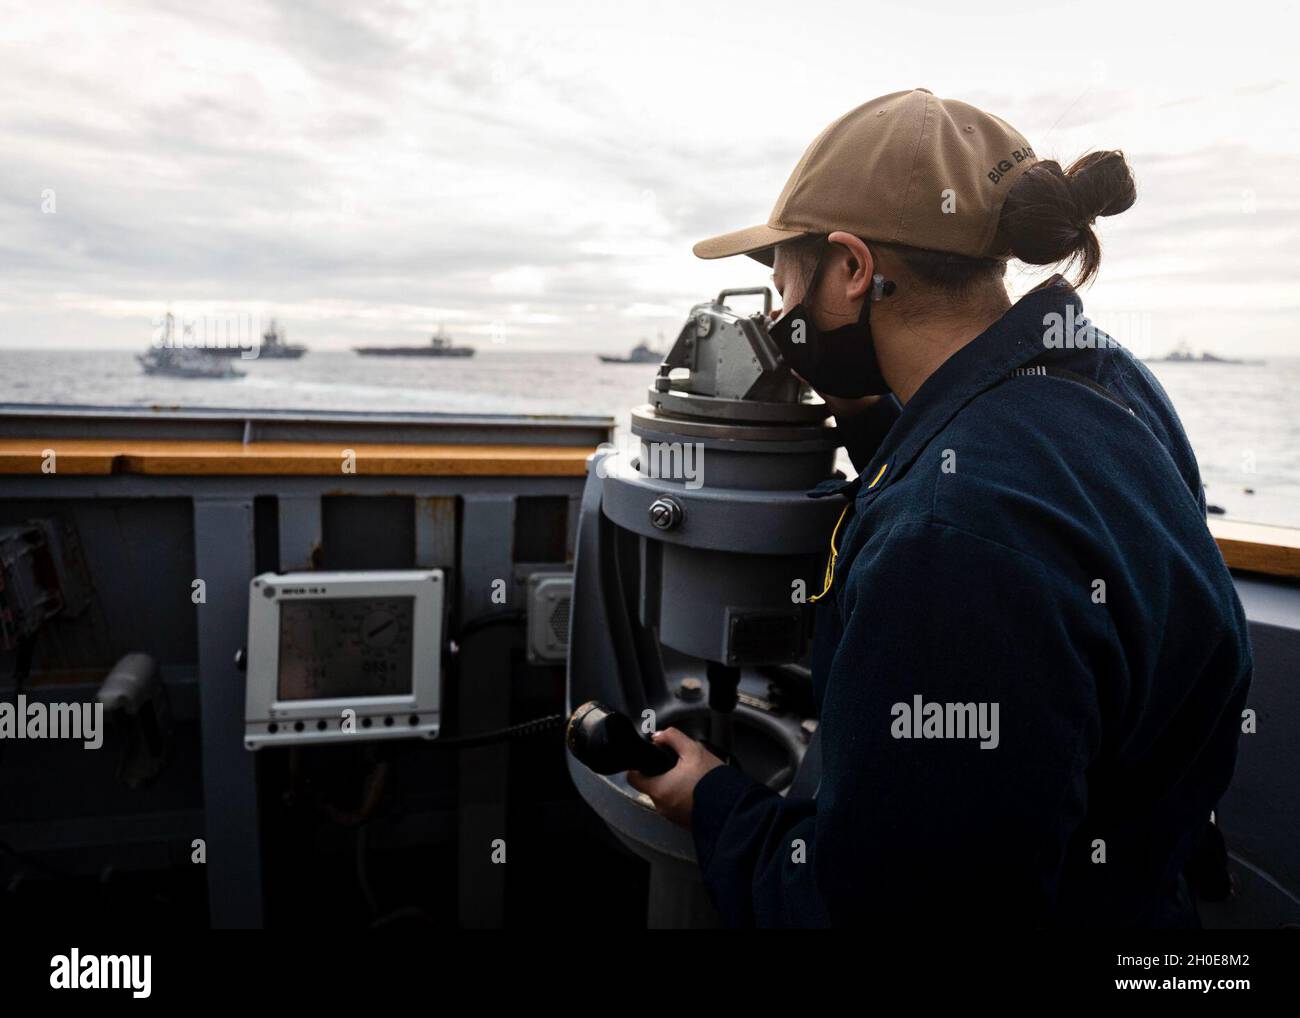 Conning Officer Ensign Marion Bautista, from Chicago, looks through a telescopic alidade on the bridge wing aboard the Arleigh Burke-class guided-missile destroyer USS John S. McCain (DDG 56) as the ship sails in formation with ships from the Nimitz and Theodore Roosevelt Carrier Strike Group during dual carrier operations. McCain is assigned to Destroyer Squadron (DESRON) 15, the Navy’s largest forward-deployed DESRON and the U.S. 7th Fleet’s principal surface force. Stock Photo